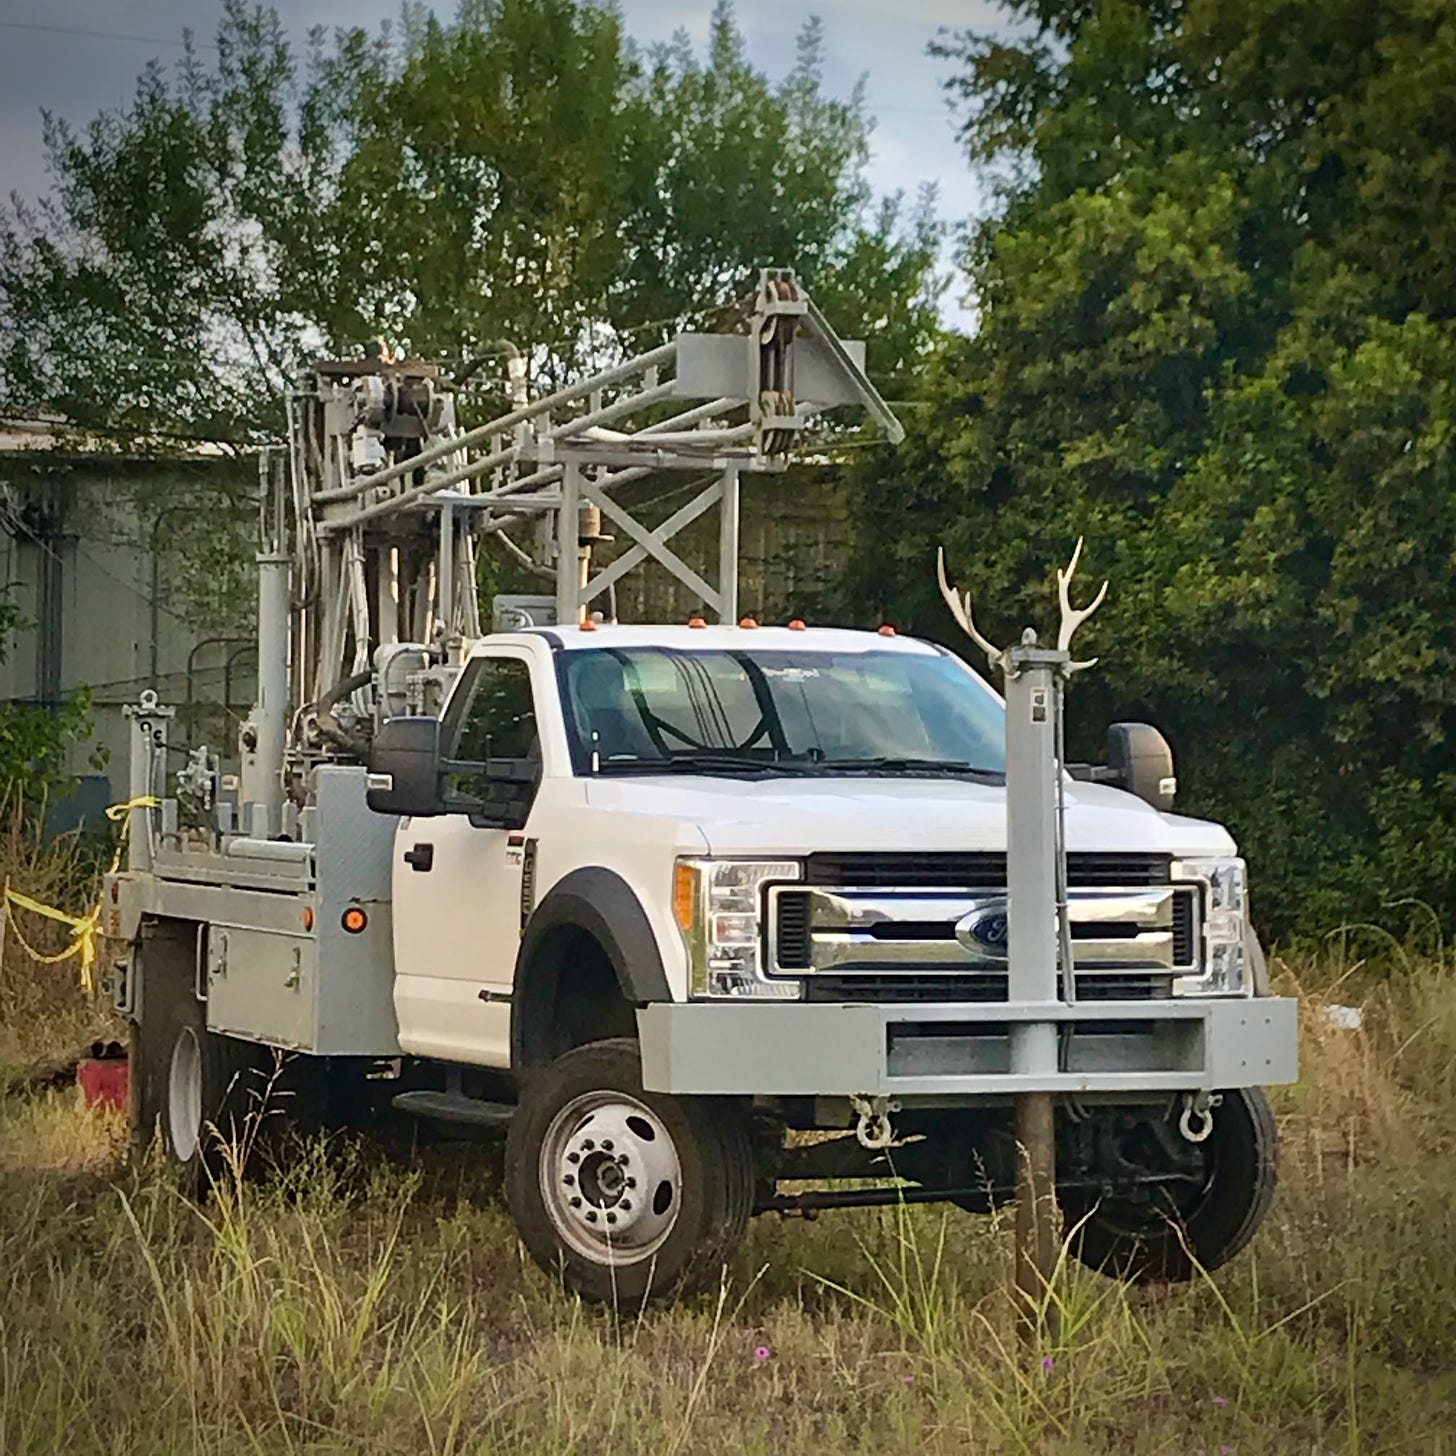 Ford truck with antlers